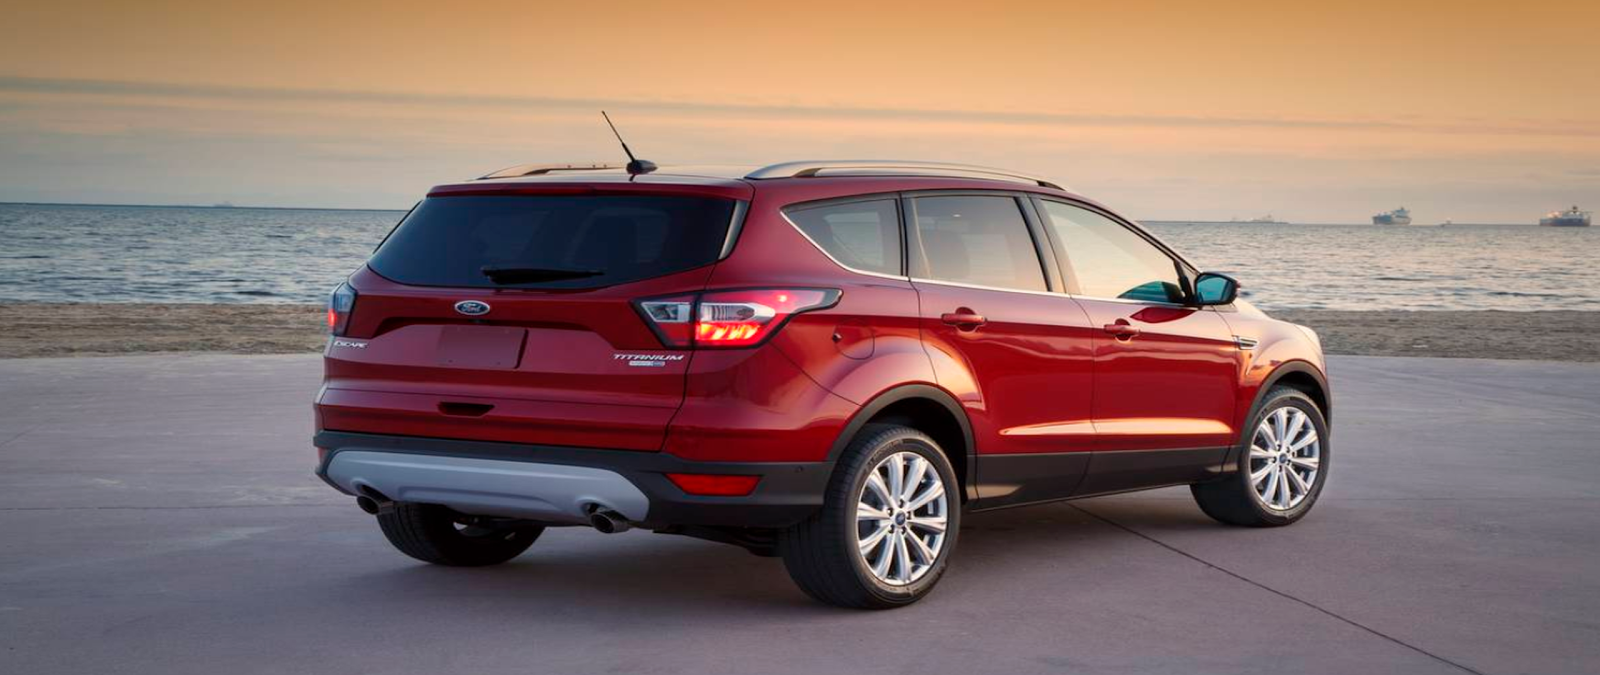 2017 ford escape owners manual pdf